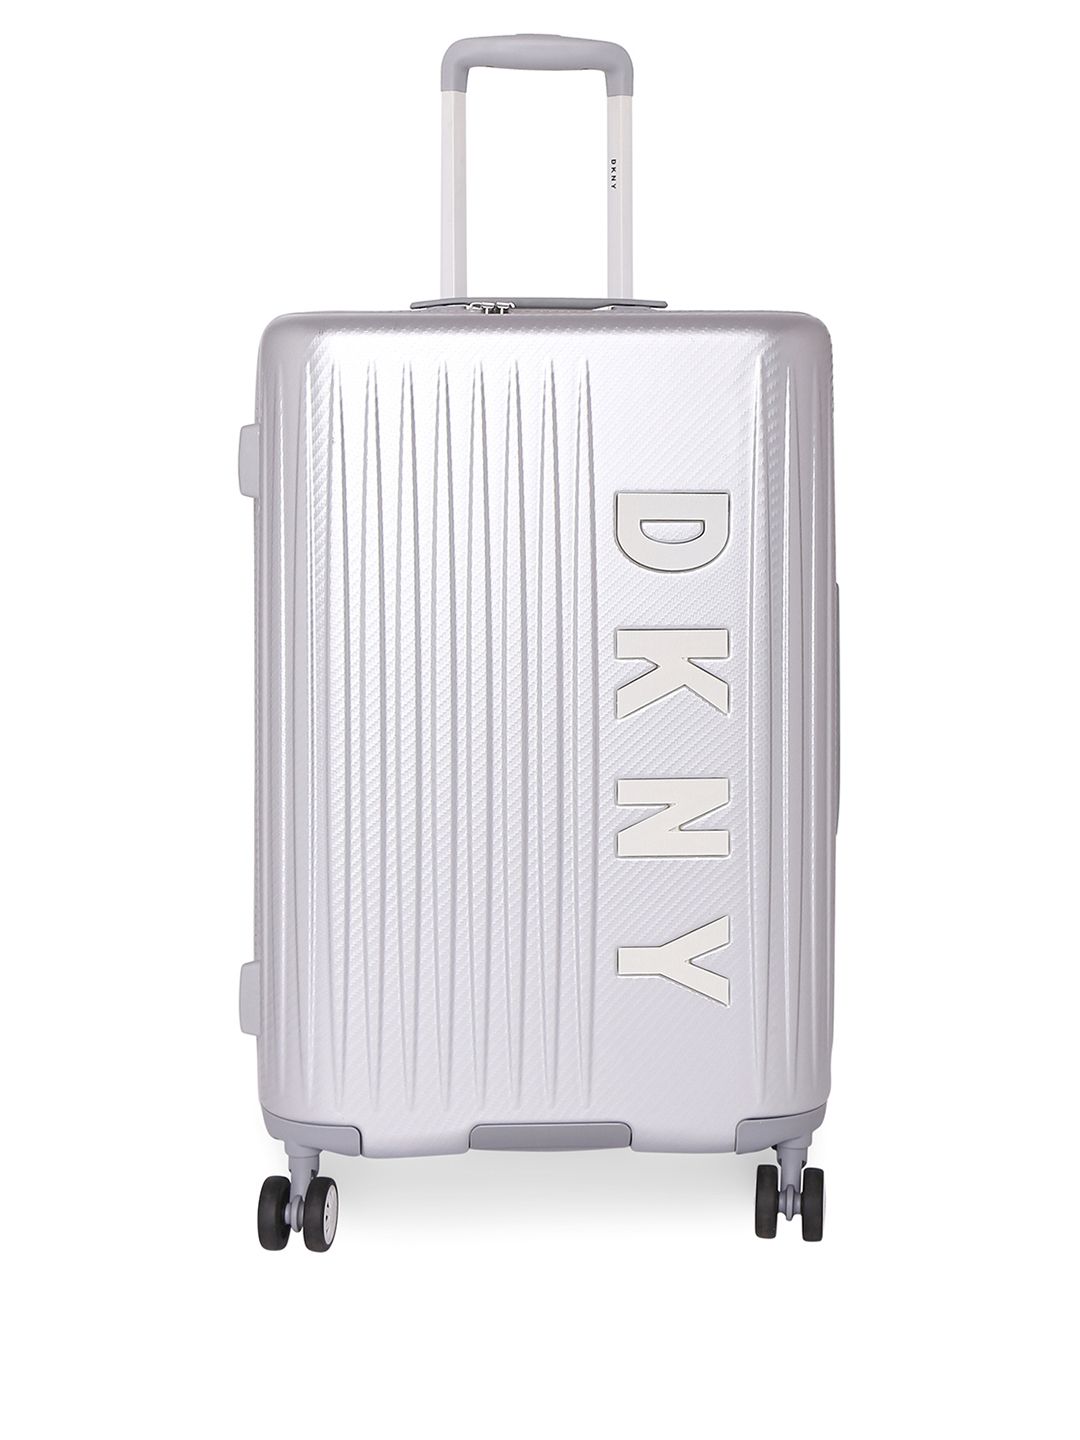 DKNY Unisex Silver Blaze HS Range Large Trolley Bag Price in India